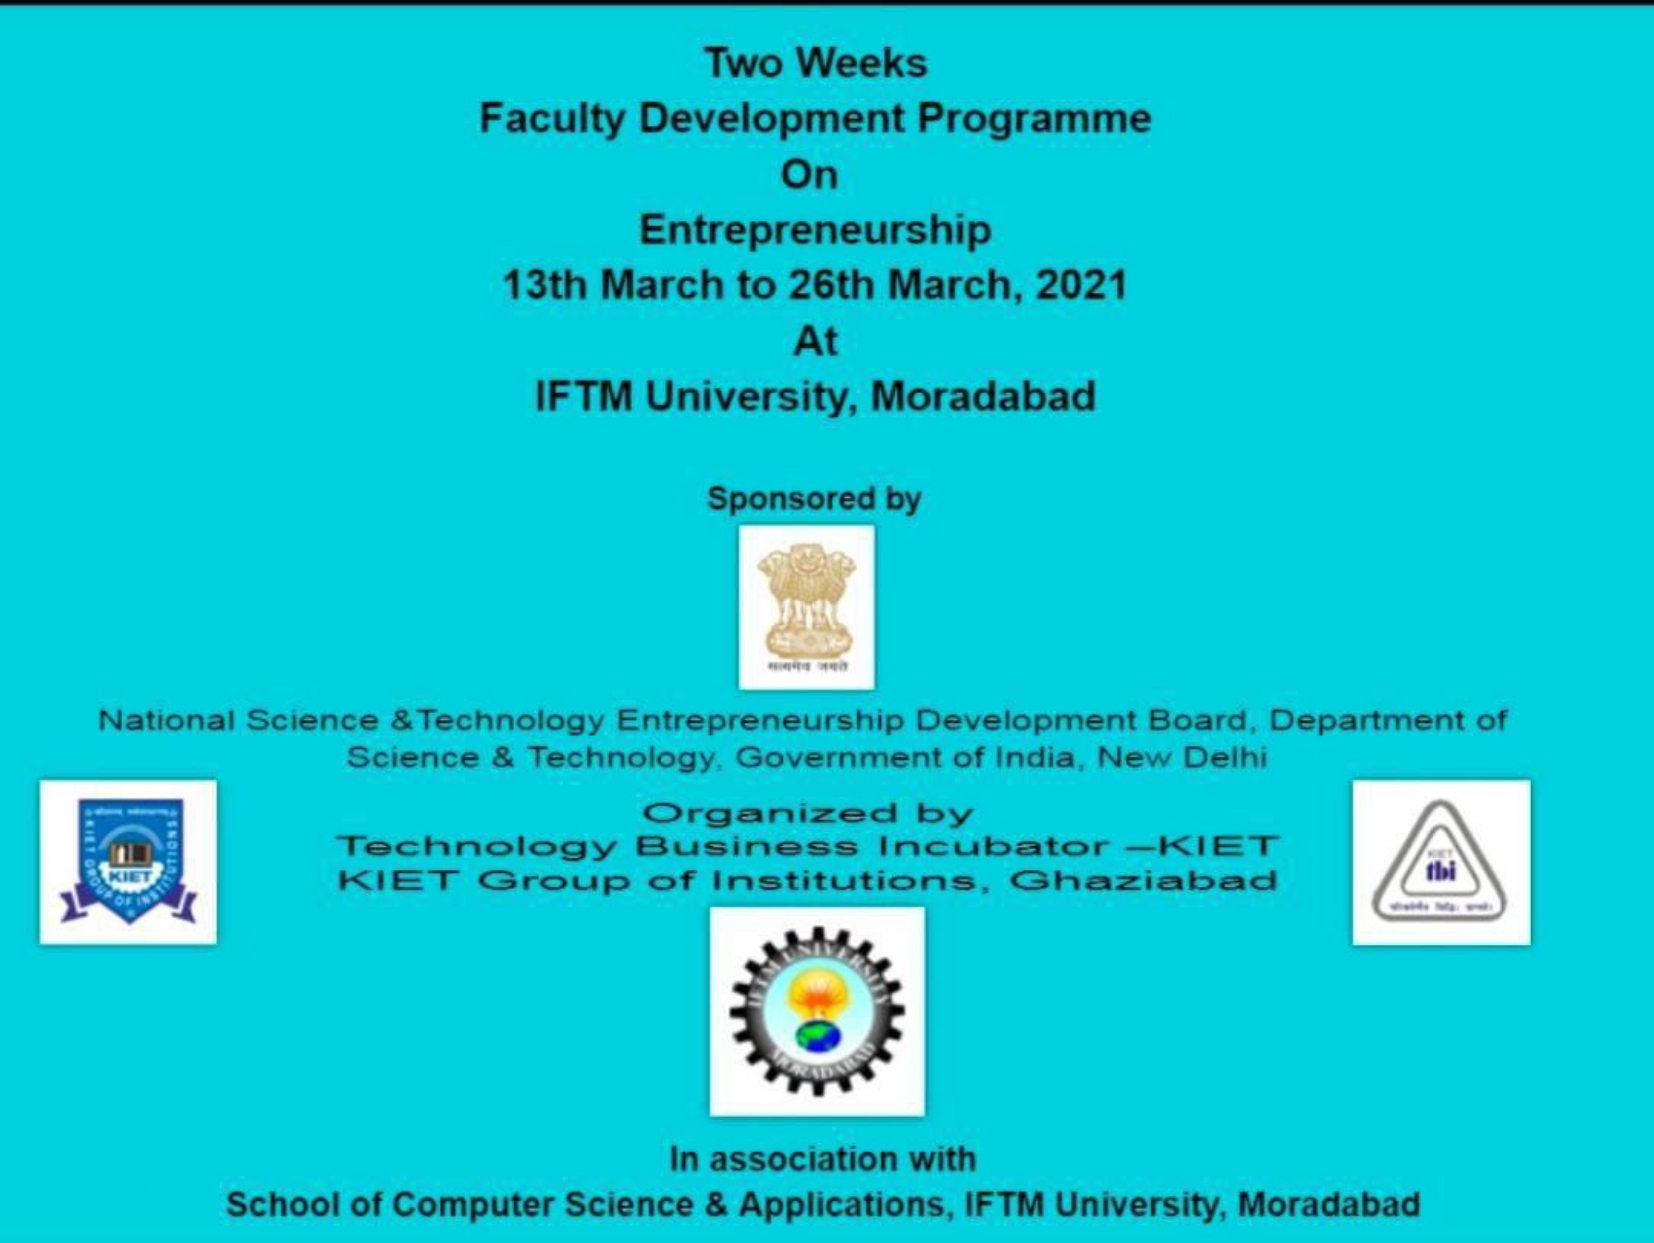 Two Weeks Faculty Development Programme on Entrepreneurship ( March 13 -26, 2021) at IFTM UNIVERSITY